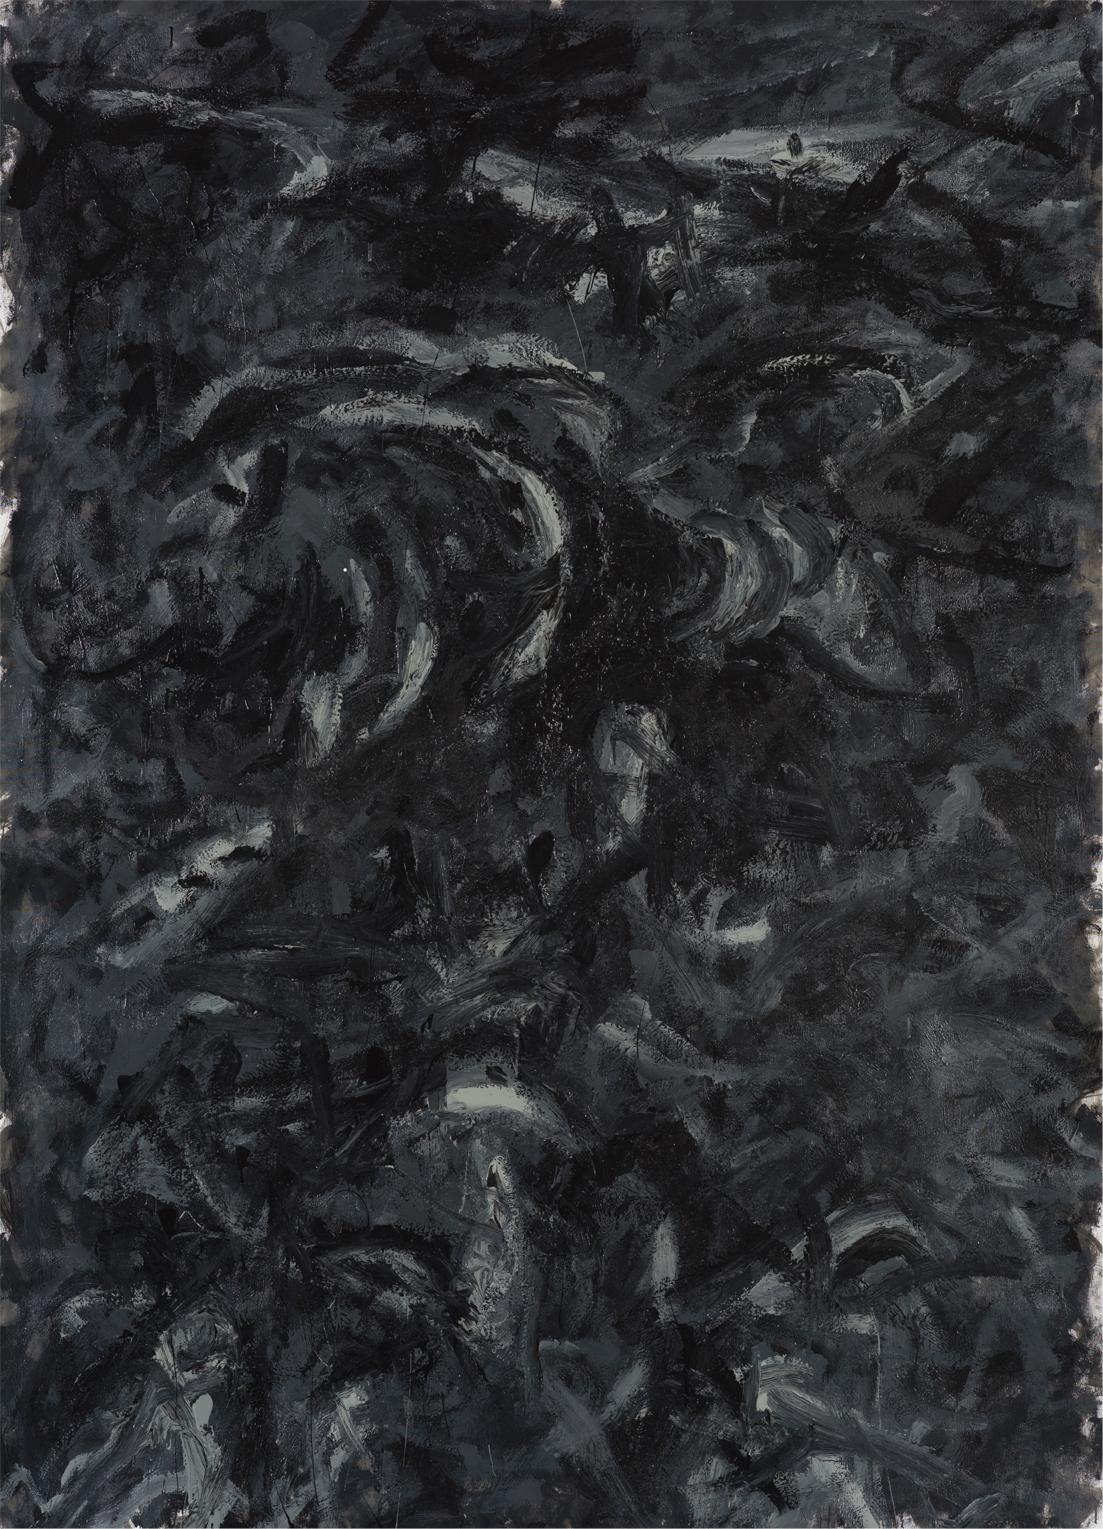 Untitled 017 [Remains of the Remains 017] - Contemporary, Black, Organic, Gray - Painting by Zsolt Berszán